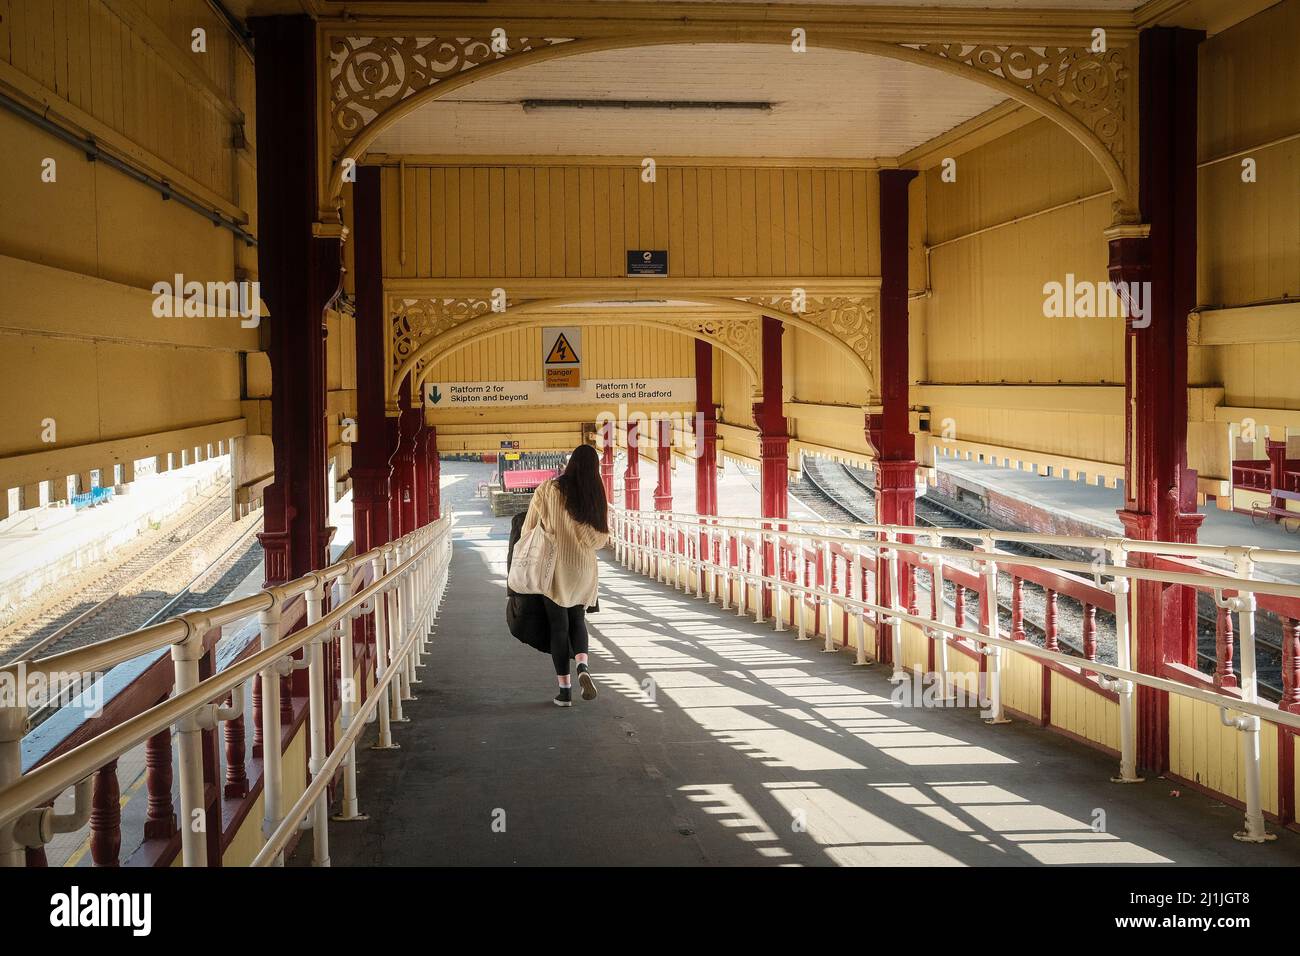 Keighley, West Yorkshire, UK. A young woman walking towards the railway station platform at Keighley Station. Stock Photo